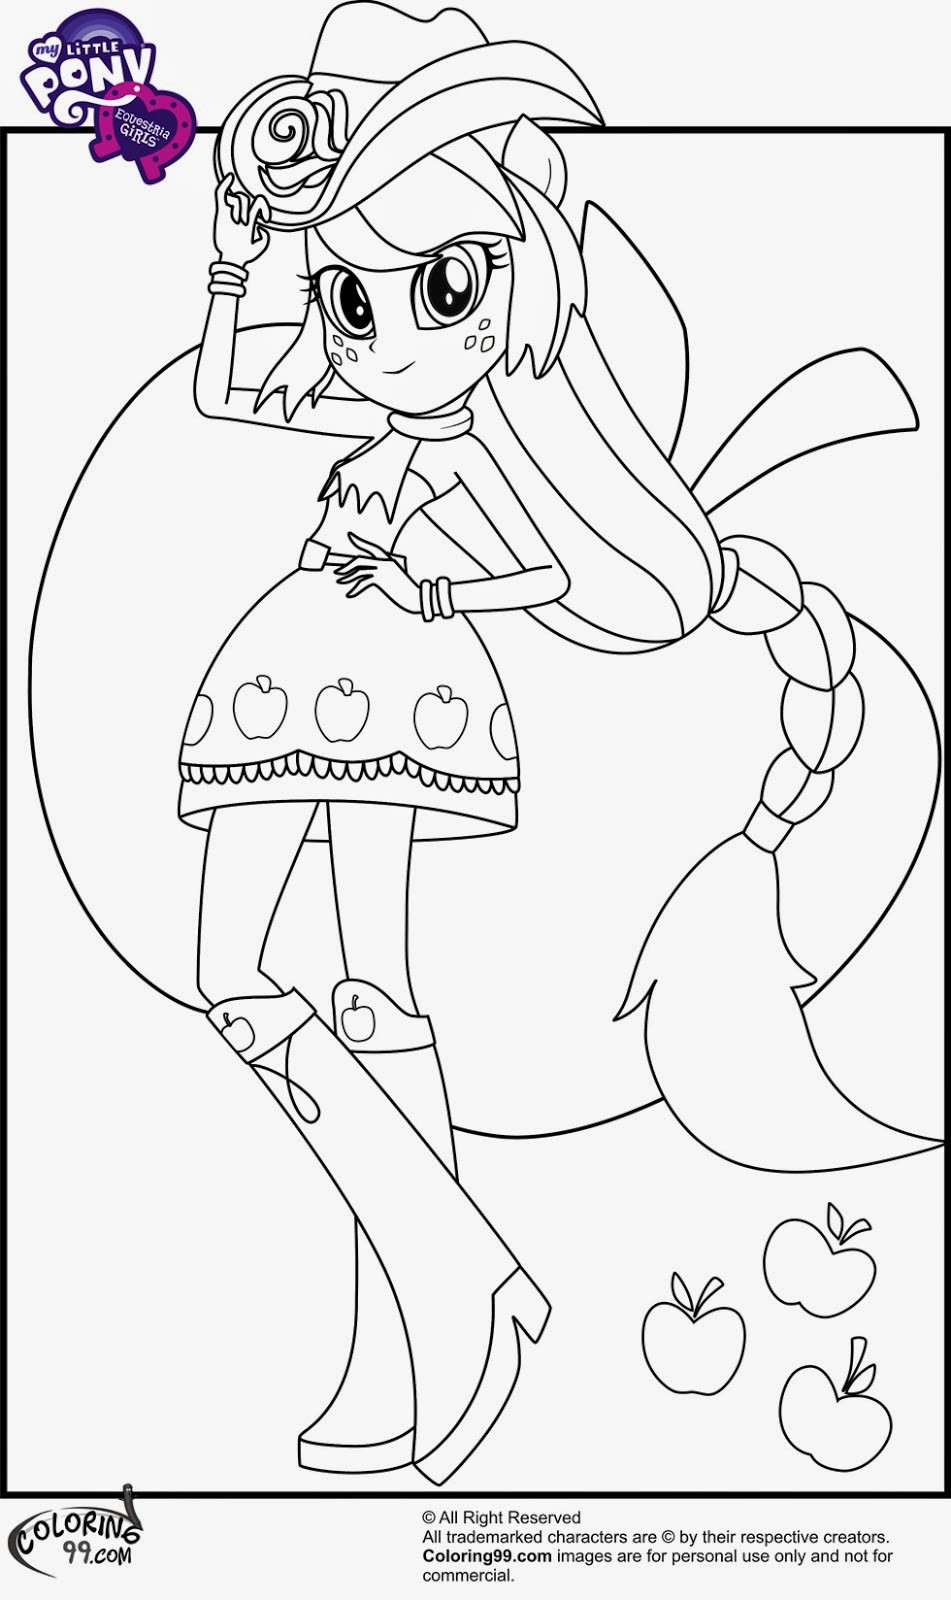 Equestria Girls Coloring Book
 My Little Pony Equestria Girls Blog ¡¡Imágenes para